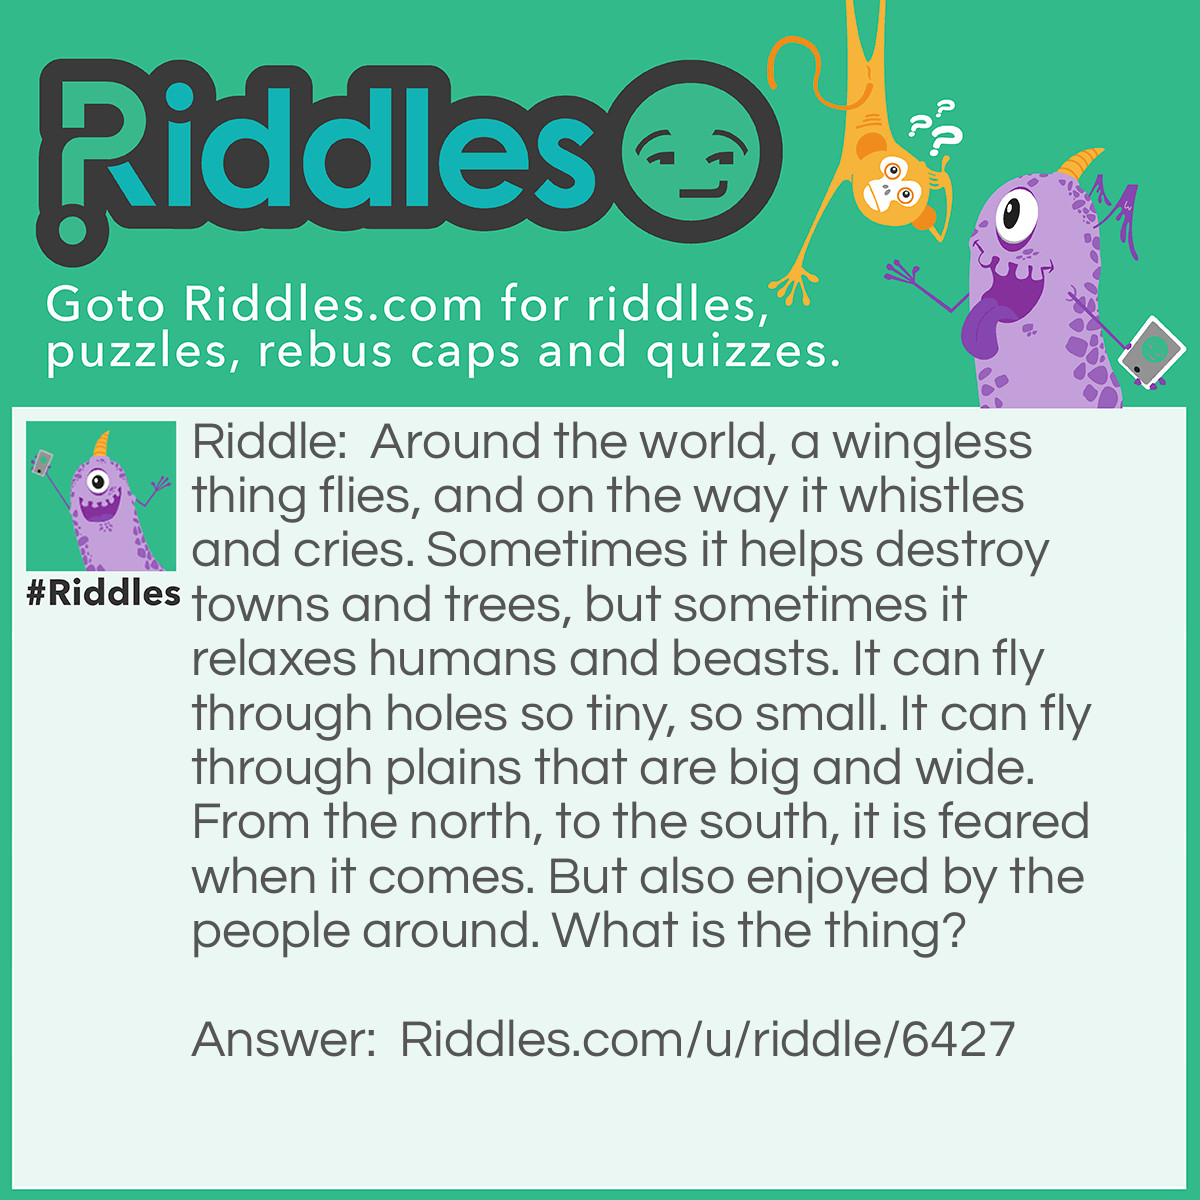 Riddle: Around the world, a wingless thing flies, and on the way it whistles and cries. Sometimes it helps destroy towns and trees, but sometimes it relaxes humans and beasts. It can fly through holes so tiny, so small. It can fly through plains that are big and wide. From the north, to the south, it is feared when it comes. But also enjoyed by the people around. What is the thing? Answer: Wind.